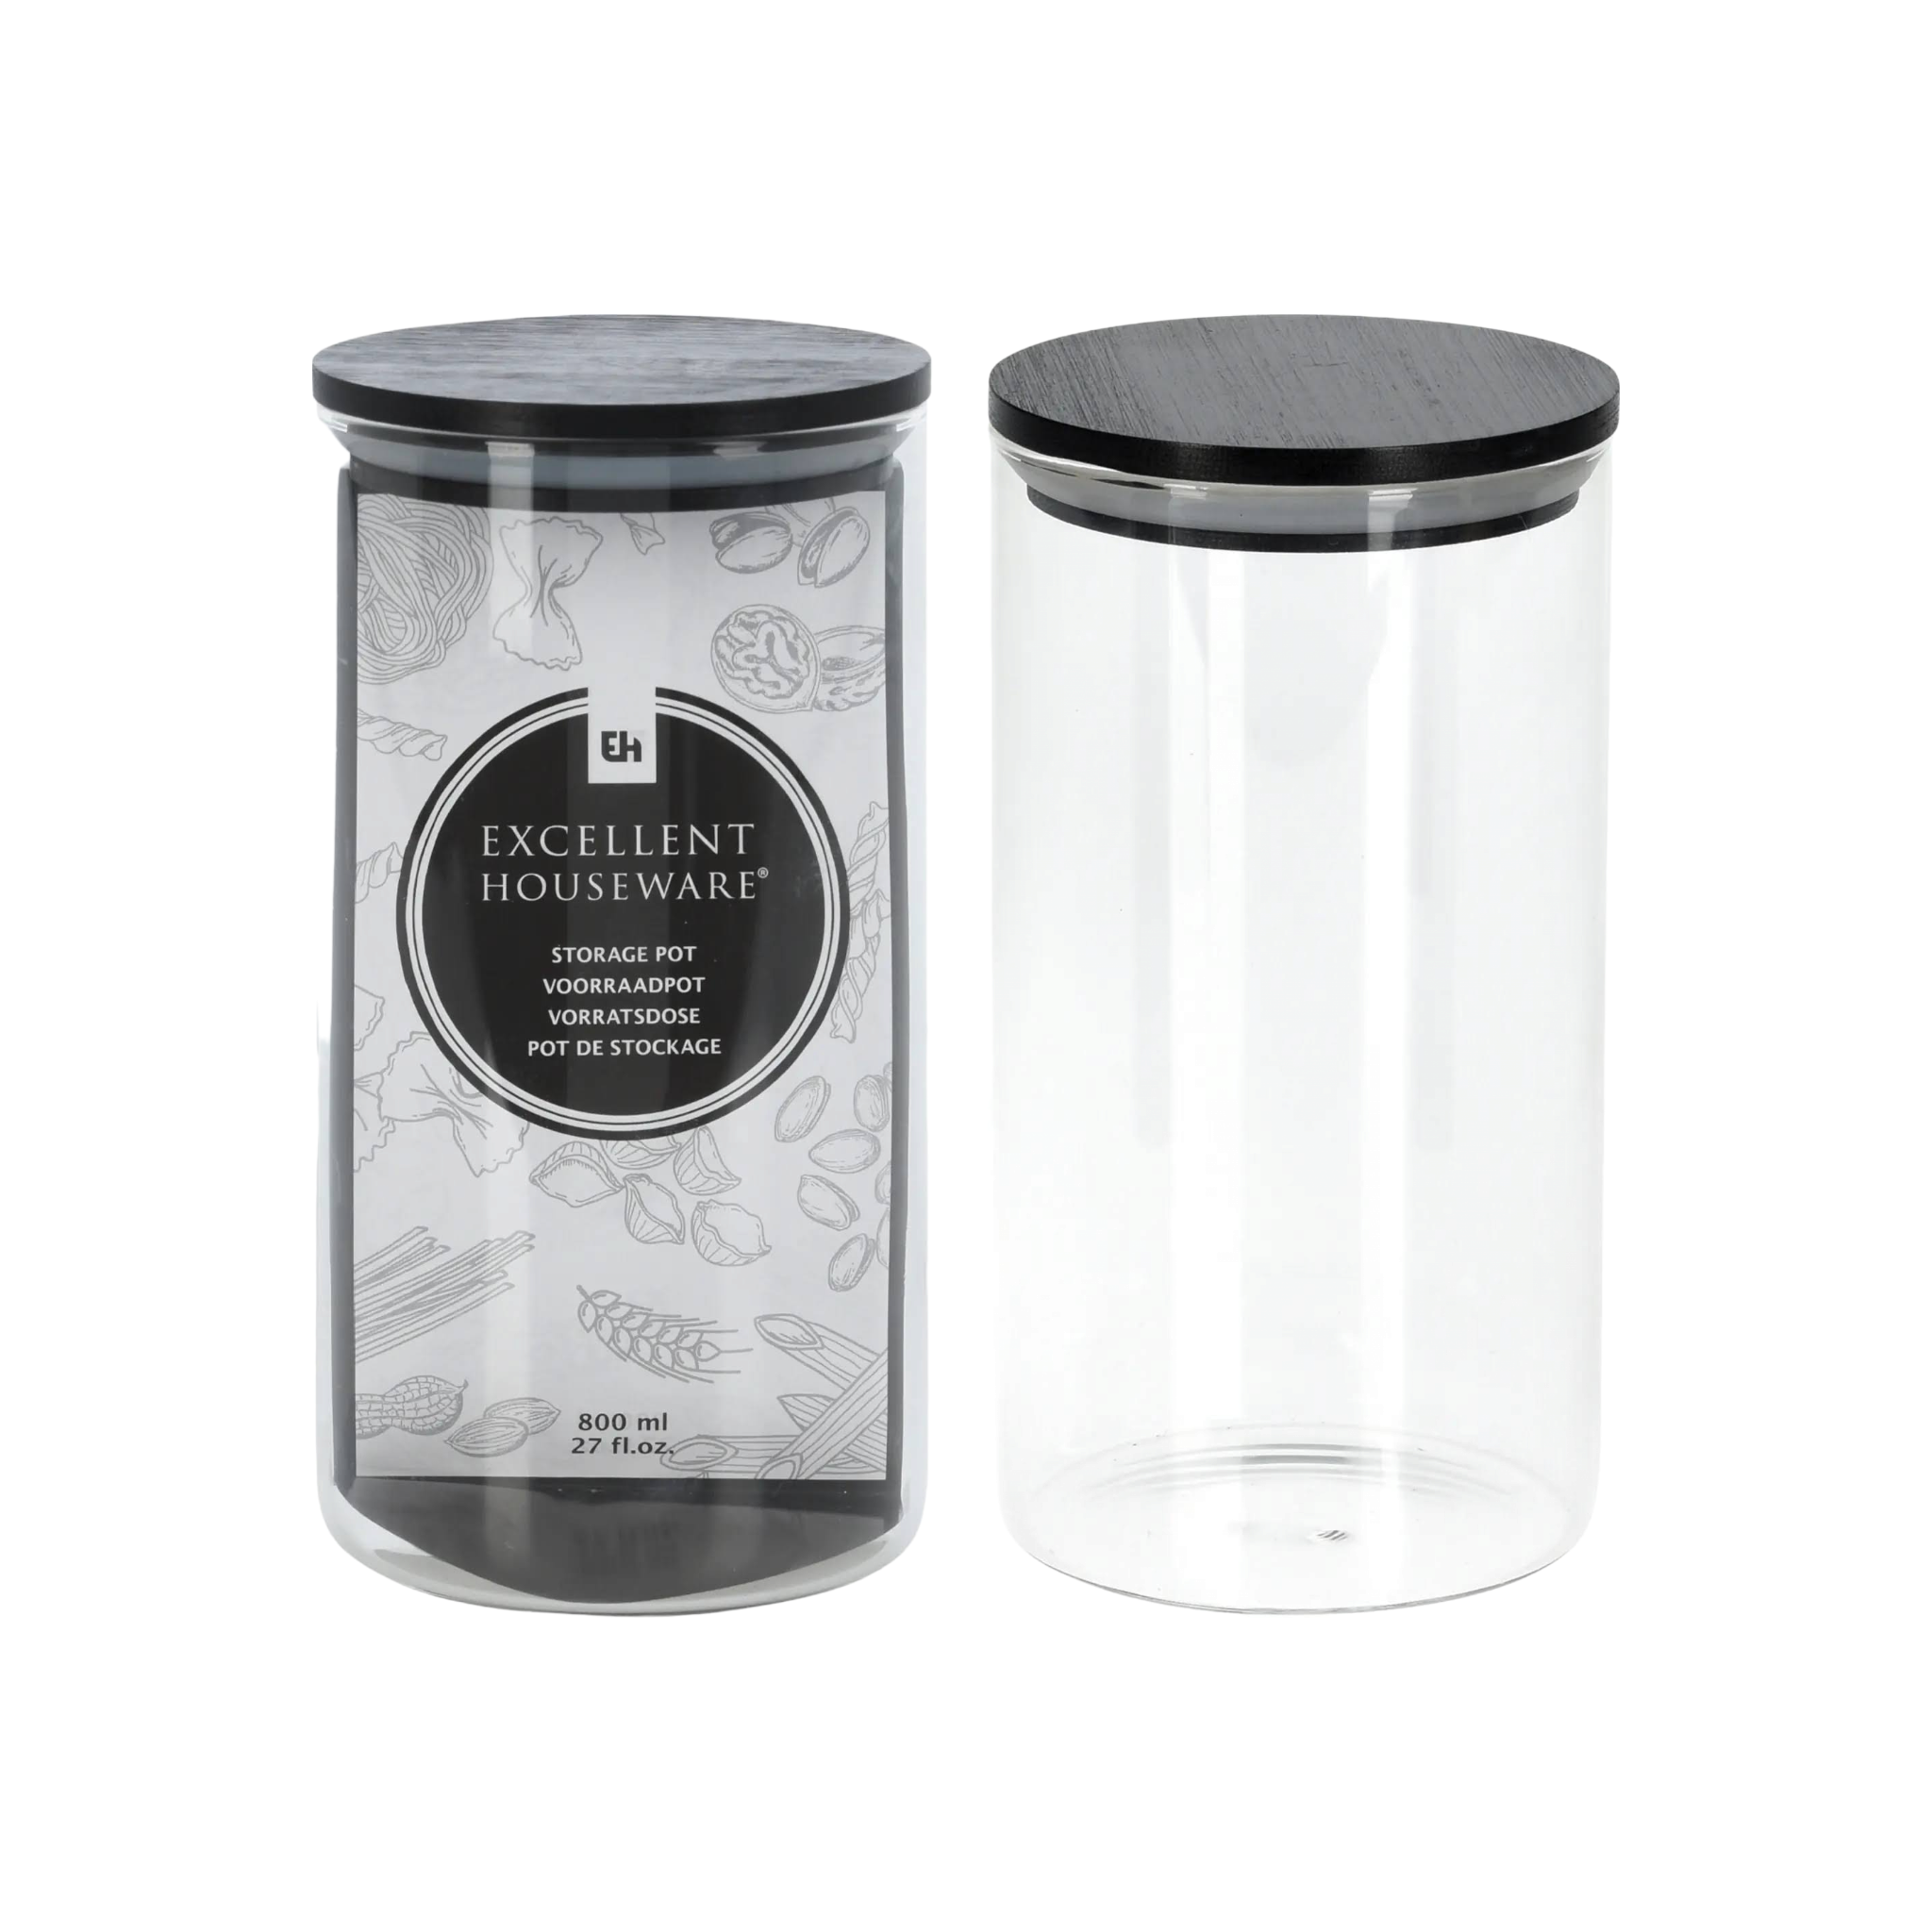 Glass Jar Canister Round with Black Lid 1300ml 21904